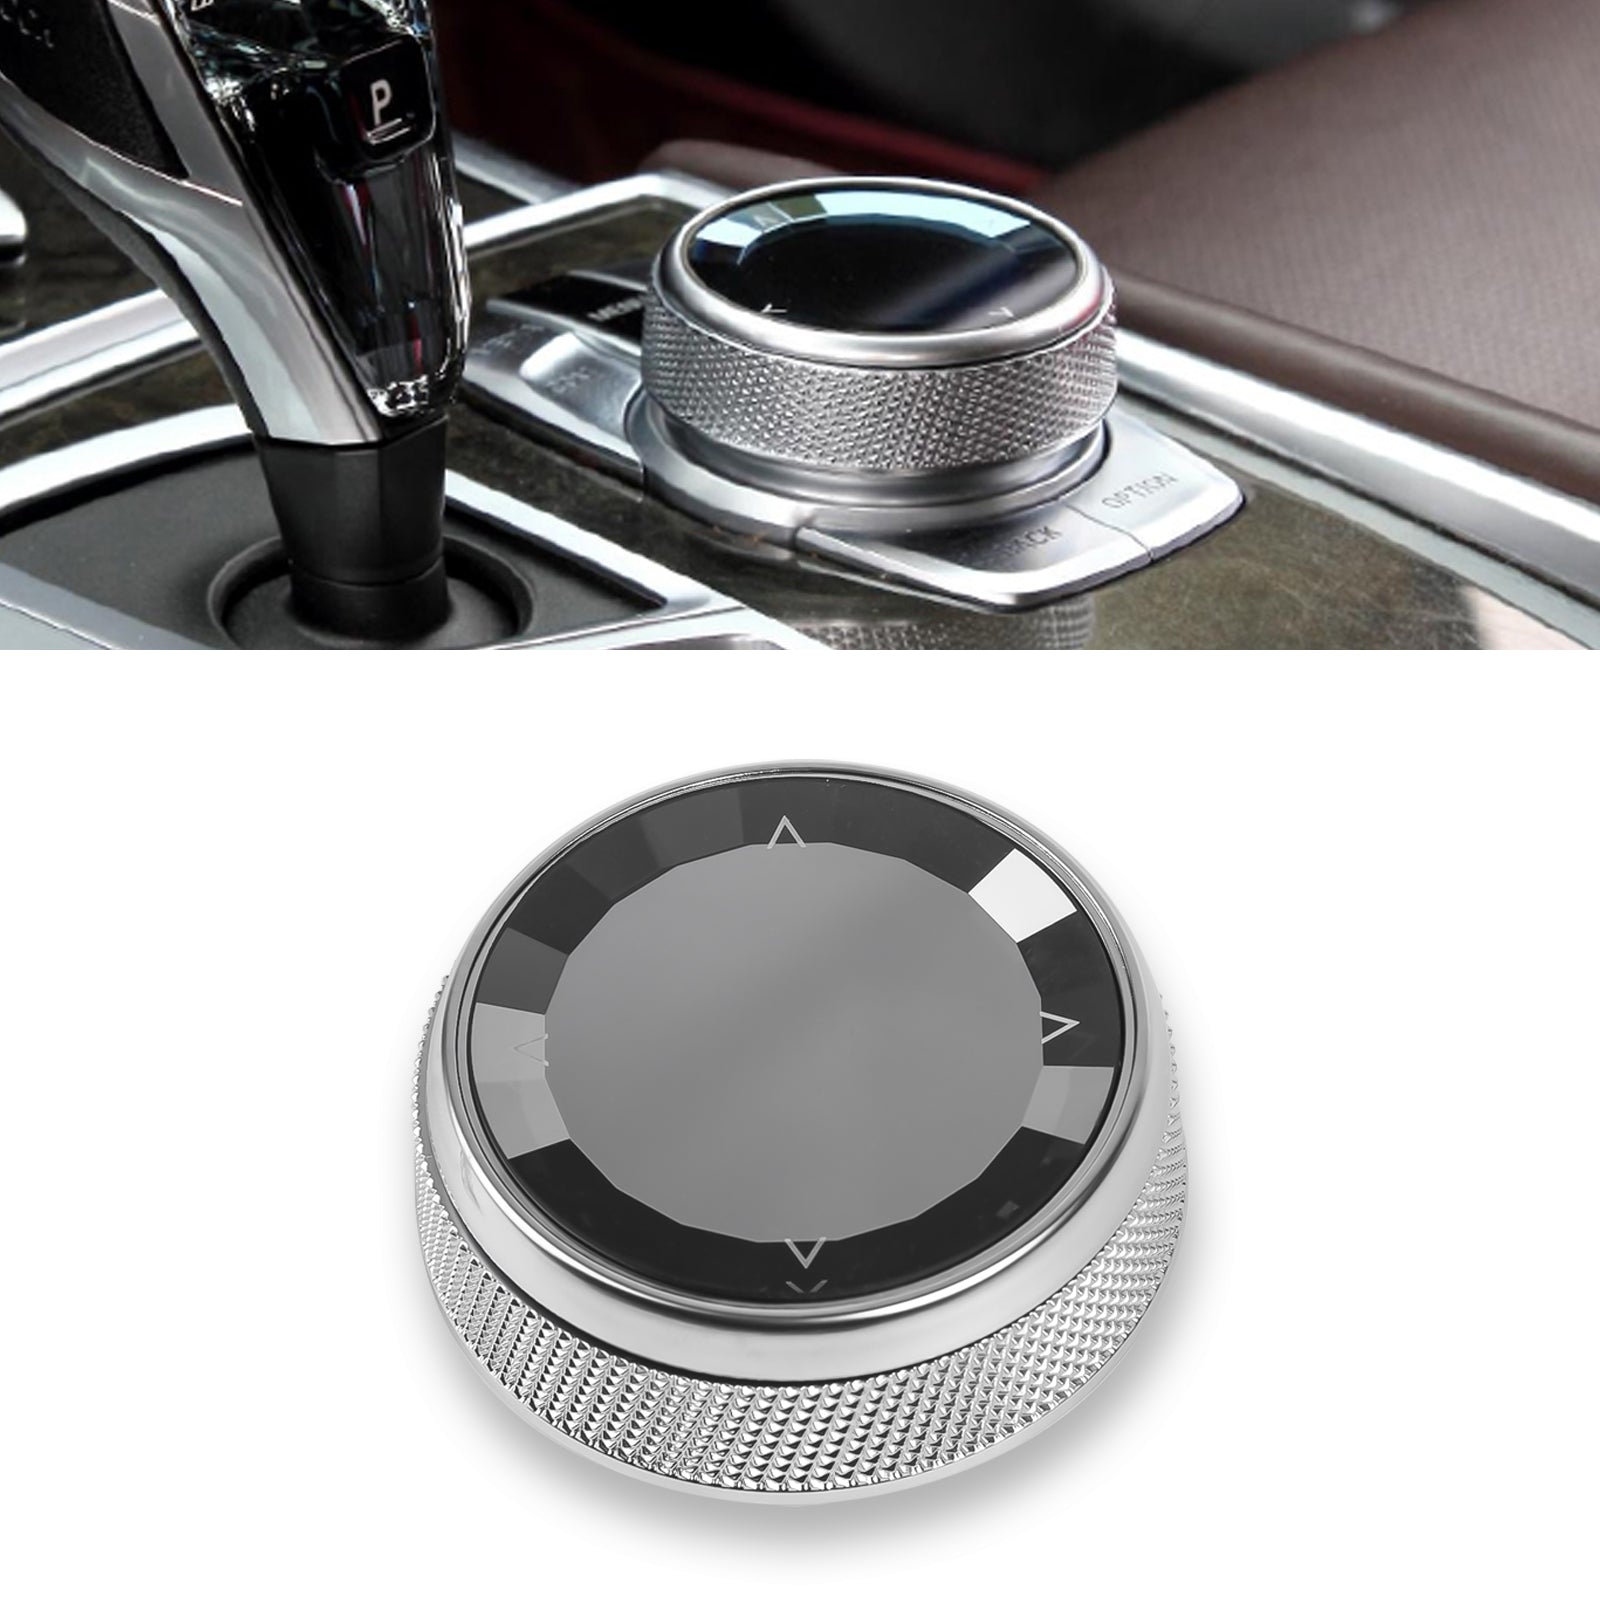 Crystal Multi-Media IDrive Controller Button Cover Trim For BMW 2 3 4